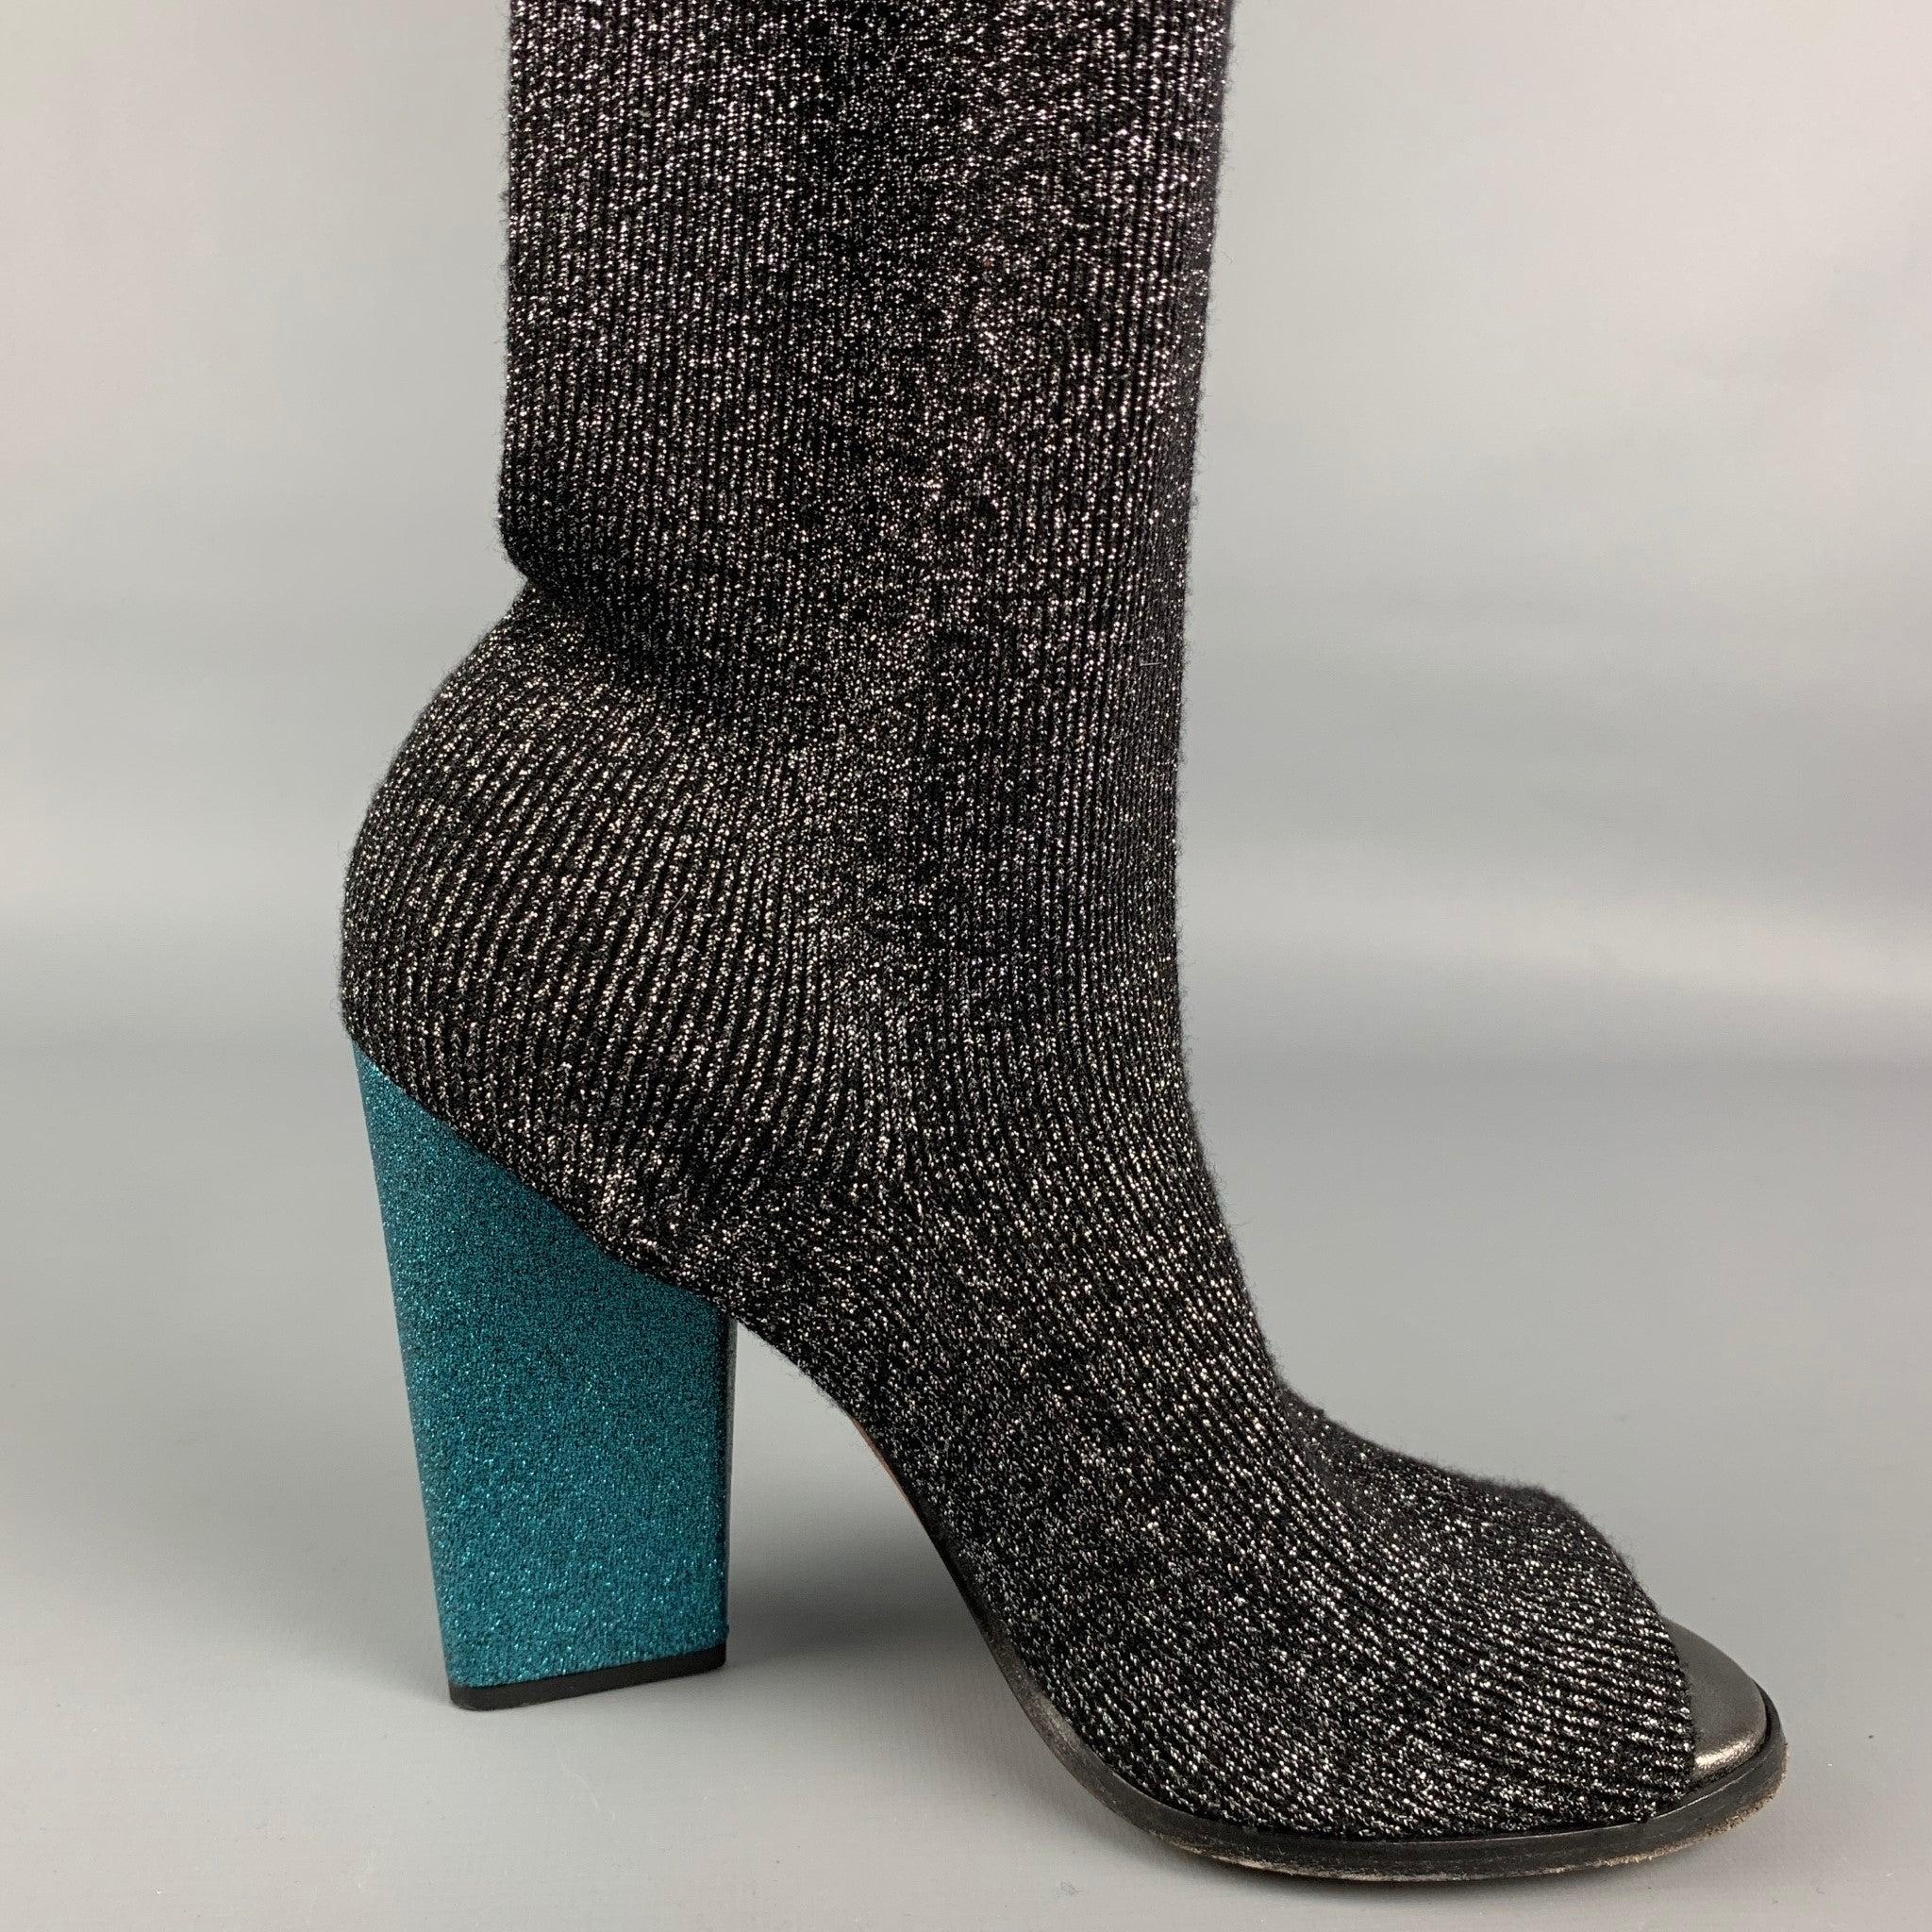 MISSONI Size 7 Black & Silver Lurex Metallic Thigh High Boots In Good Condition For Sale In San Francisco, CA